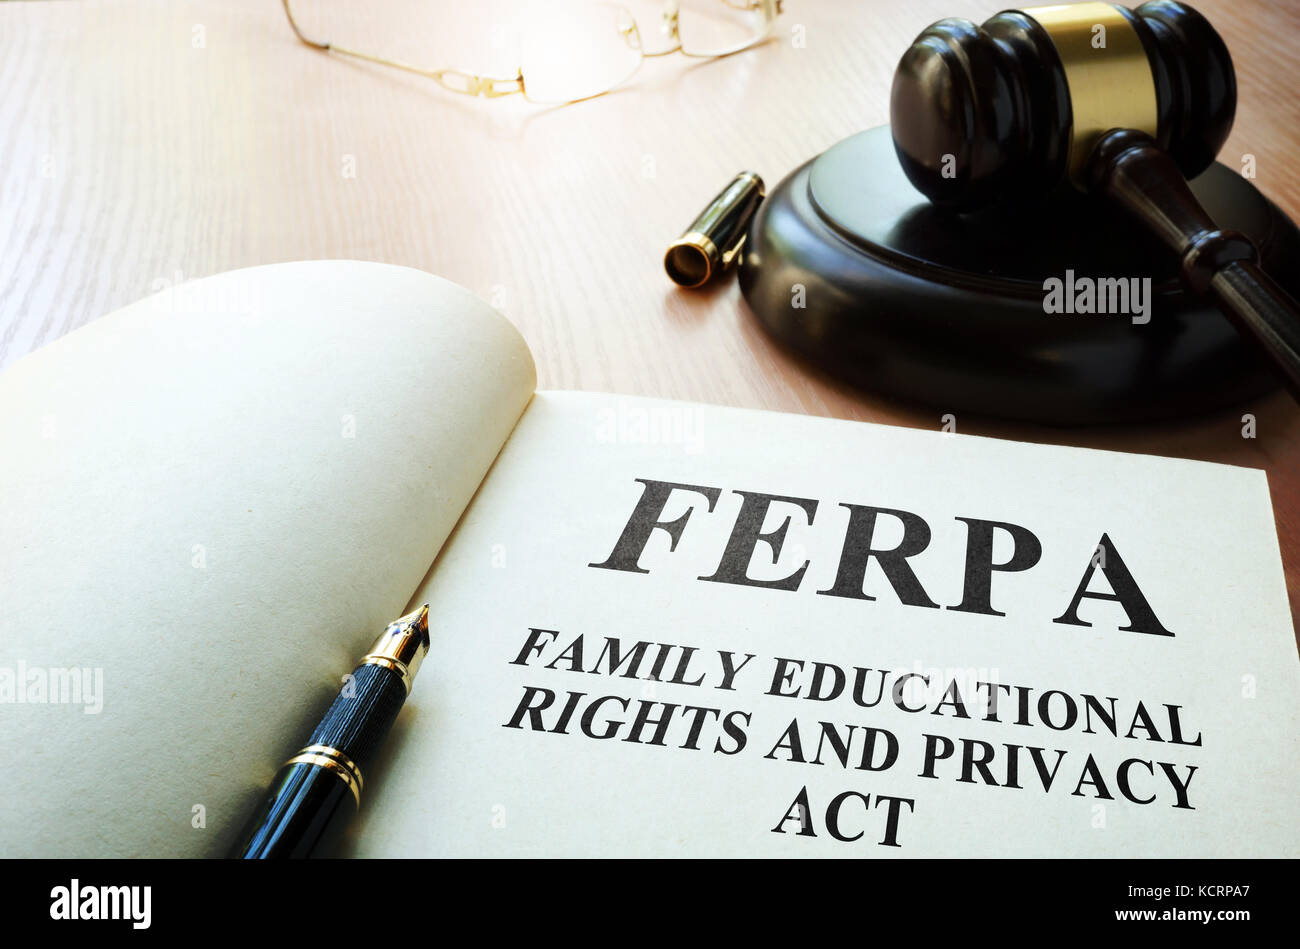 FERPA (Family Educational Rights and Privacy Act) on a table. Stock Photo